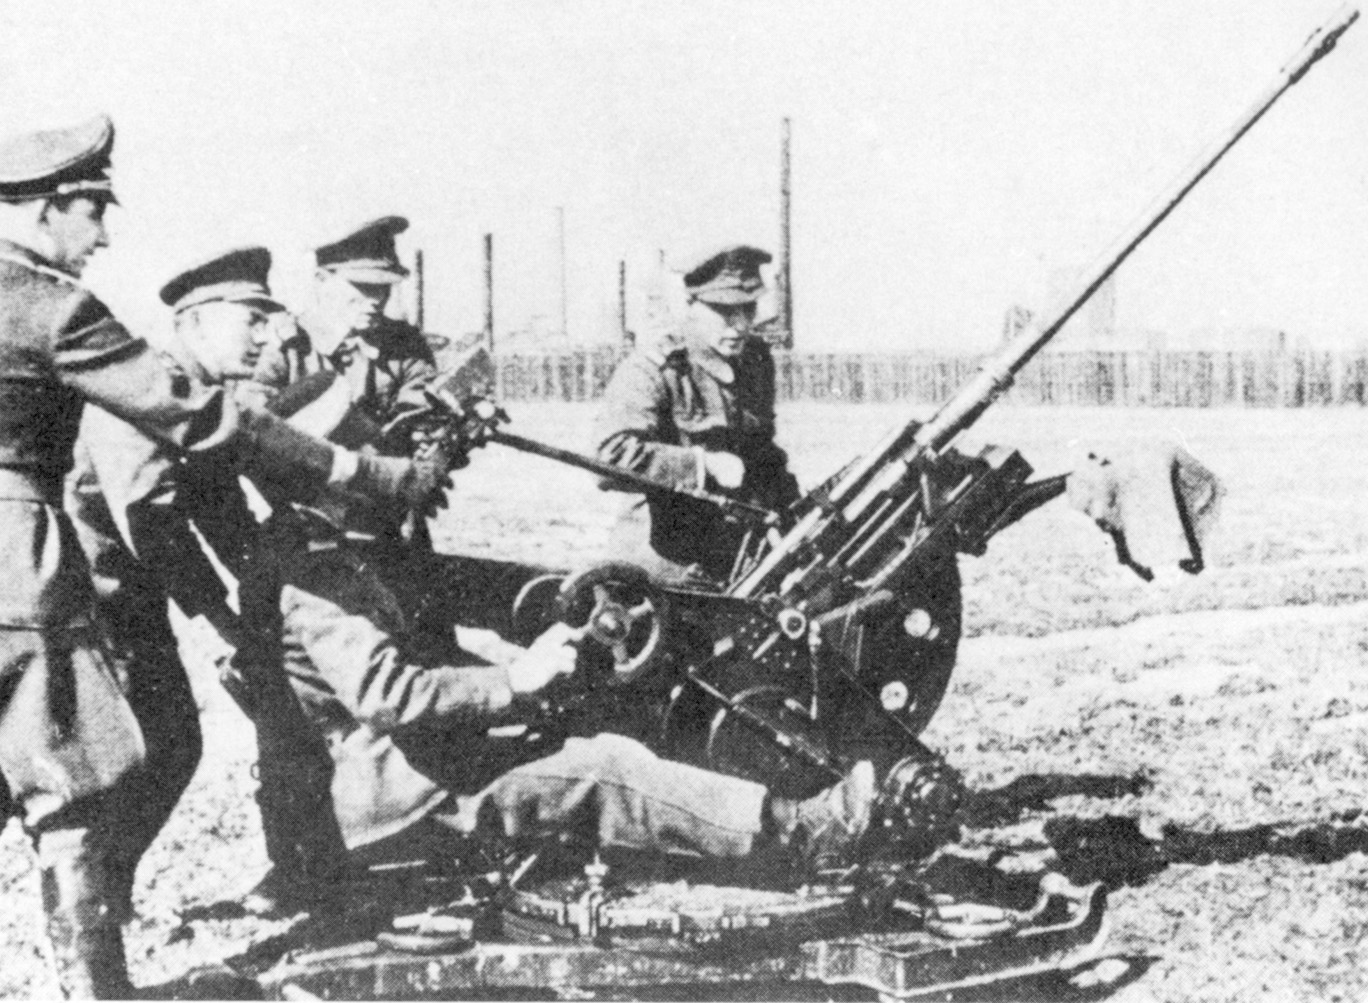 Training with a German officer, a Romanian gun crew learns to operate its weapon.